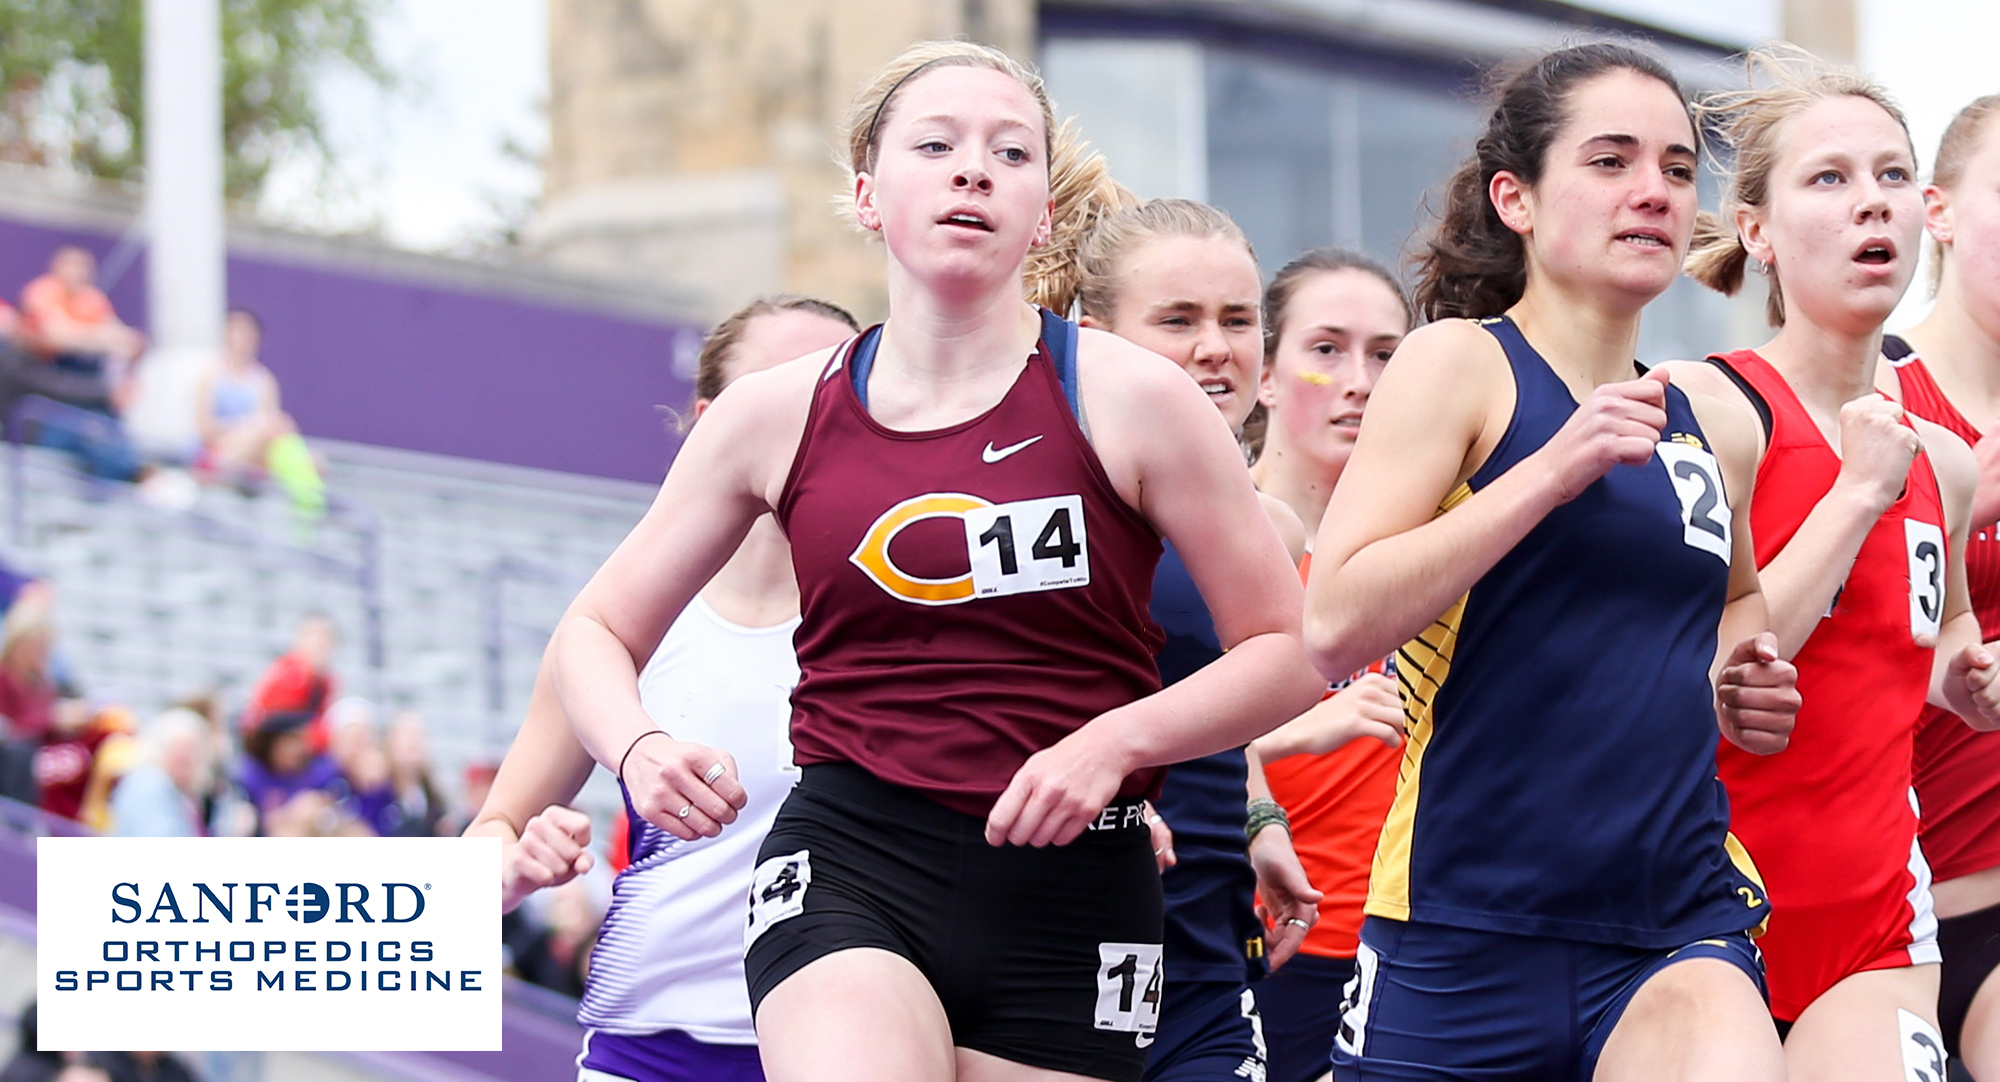 Senior Josie Herrmann was one of four Cobber athletes to compete in the NDSU Spring Classic on Friday. She finished the 1500 meters with the ninth fastest time in DIII this spring.